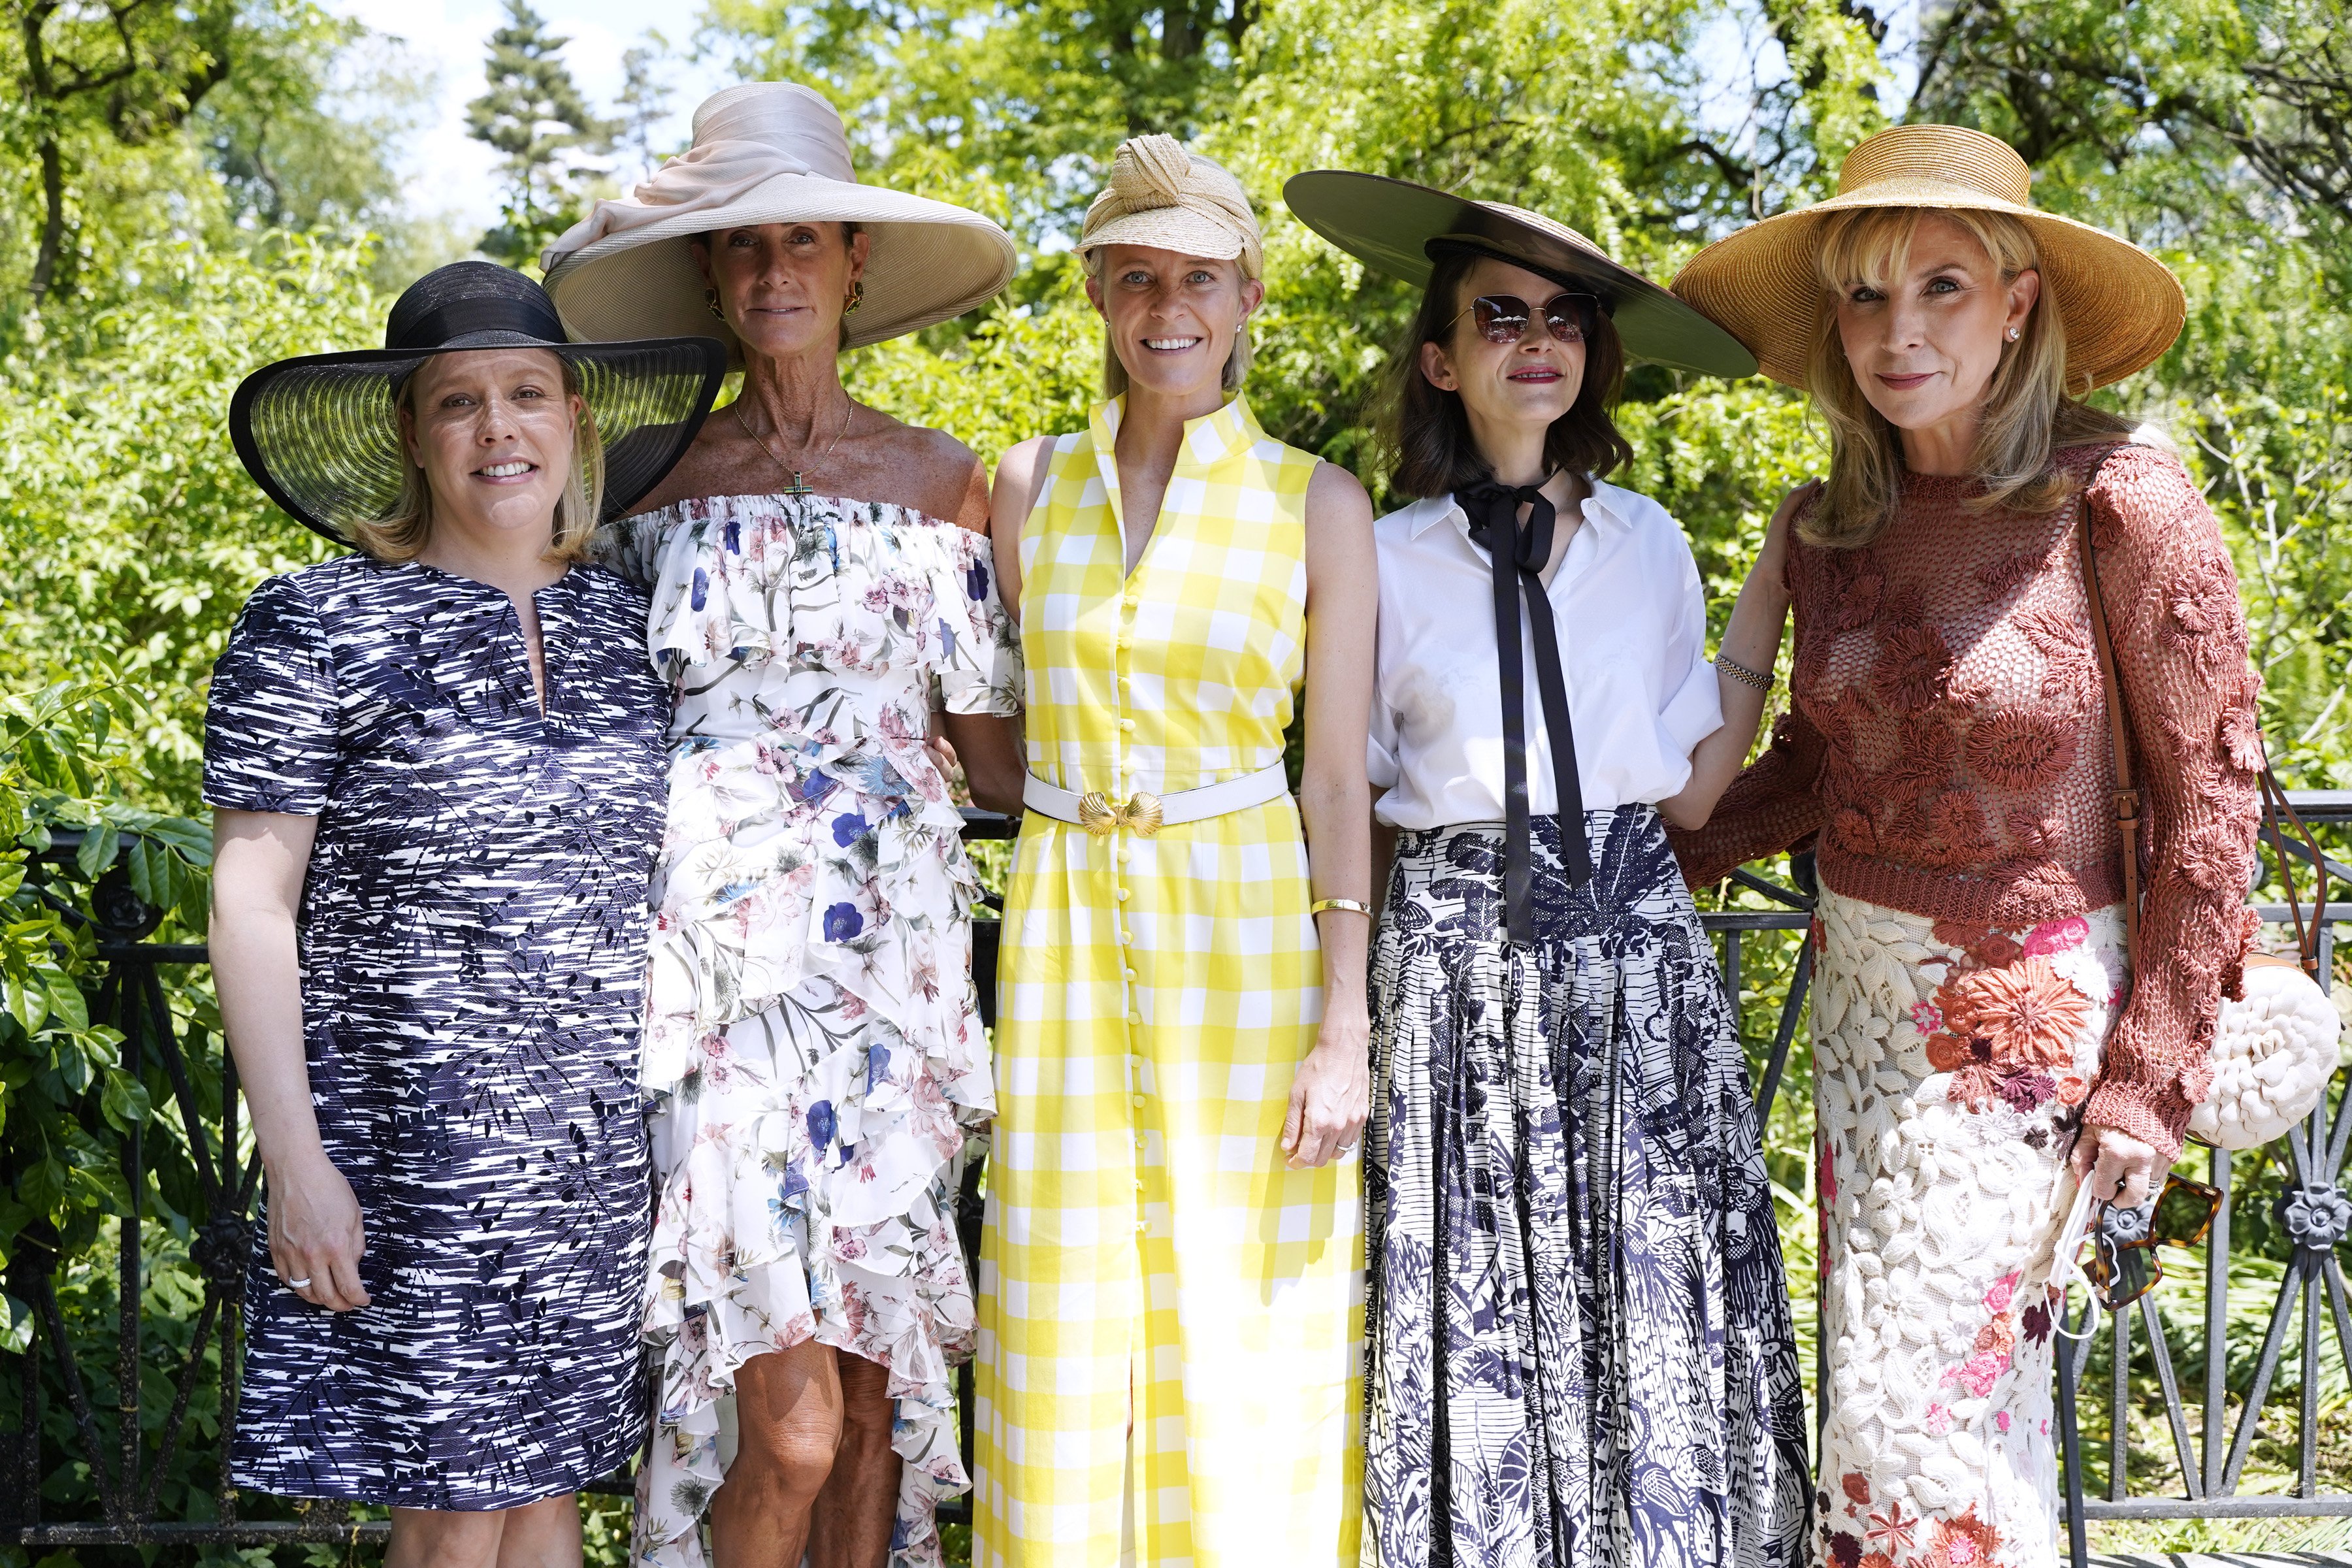  Elizabeth Rogers, Somers Farkas, Jocelyn Gailliot, Anne Stringfield and Margo Nederlander attend the Central Park Conservancy's 39th Annual Frederick Law Olmsted Awards Luncheon at Central Park on May 18, 2021 in New York City. | Source: Getty Images